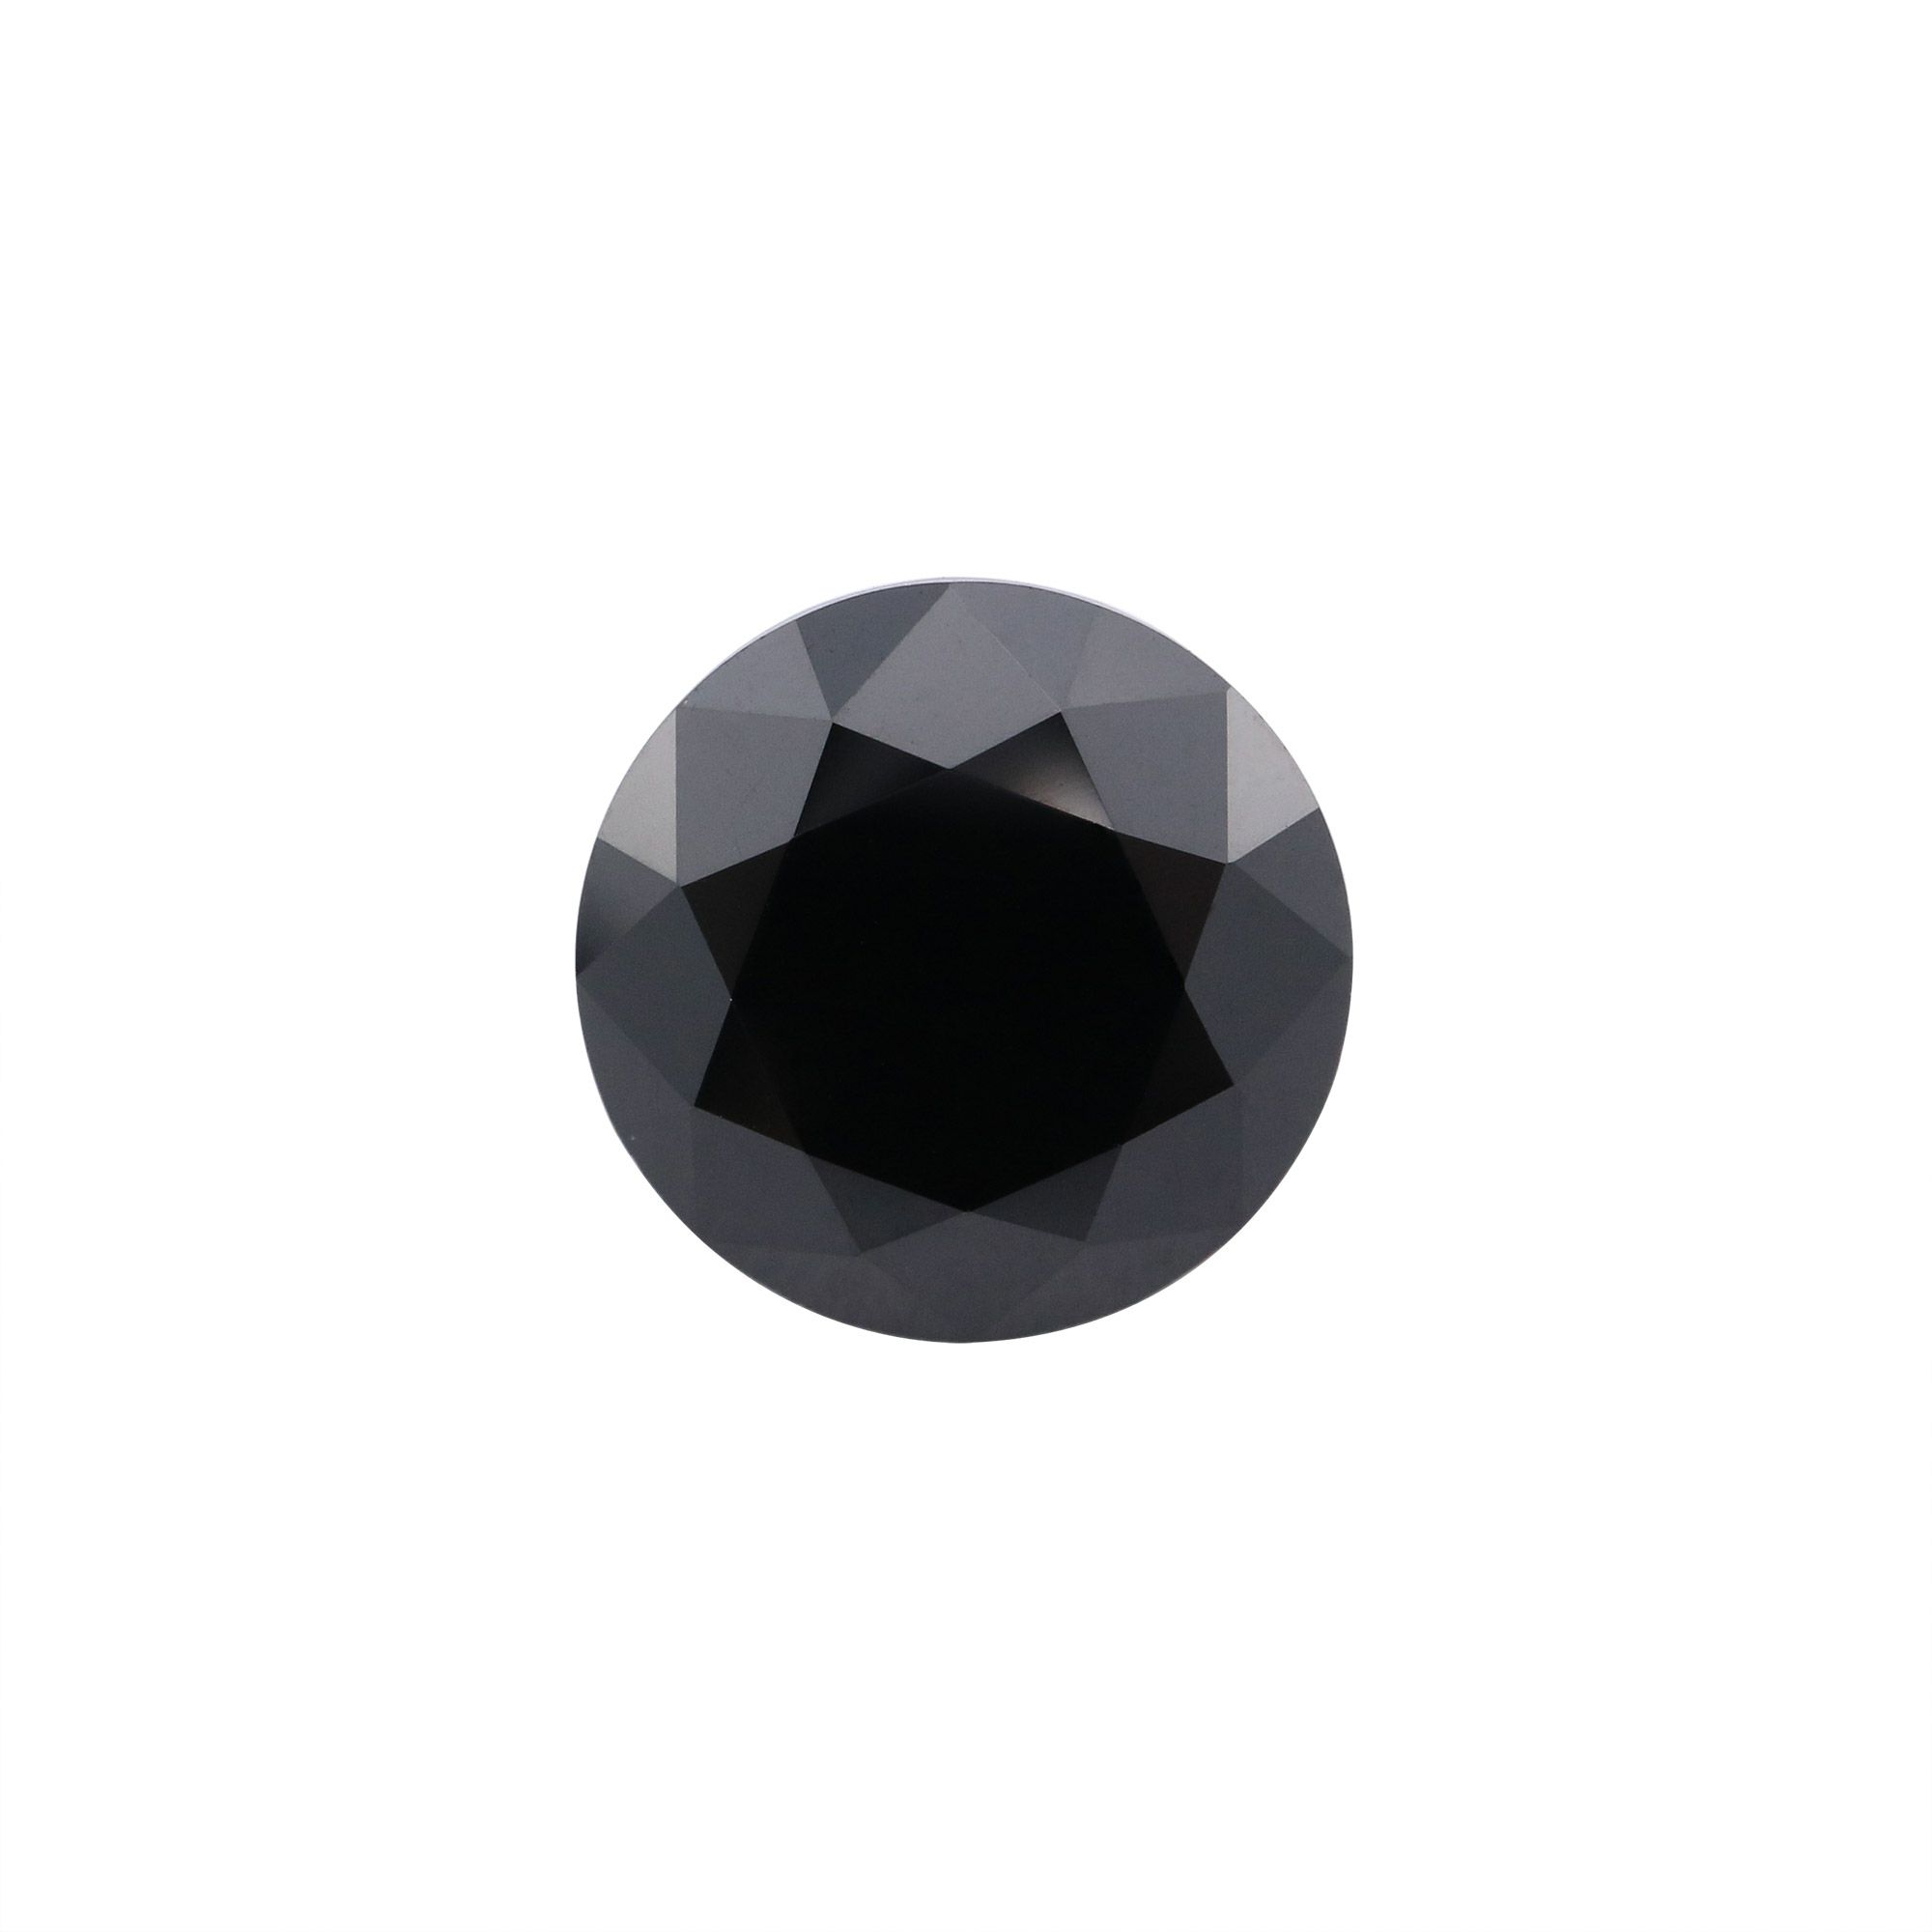 1Pcs 1-9MM Round Black Spinel Faceted Cut Loose Gemstone Natural Semi Precious Stone DIY Jewelry Supplies 4110164 - Click Image to Close